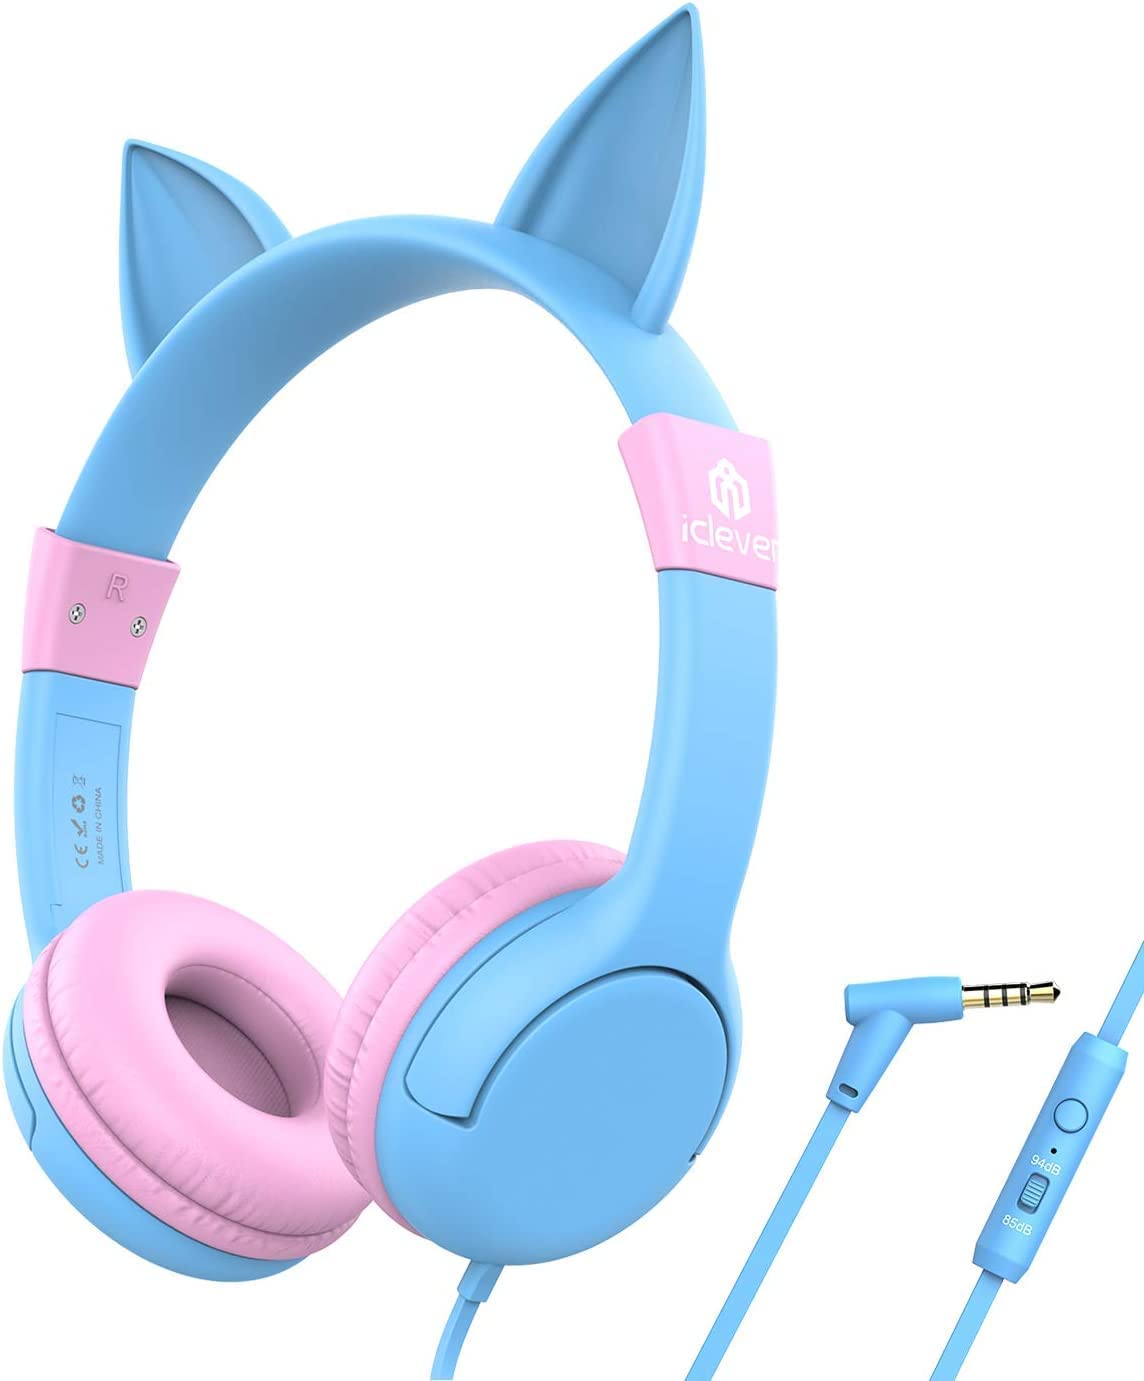 iClever HS01 Kids Headphones with Mic